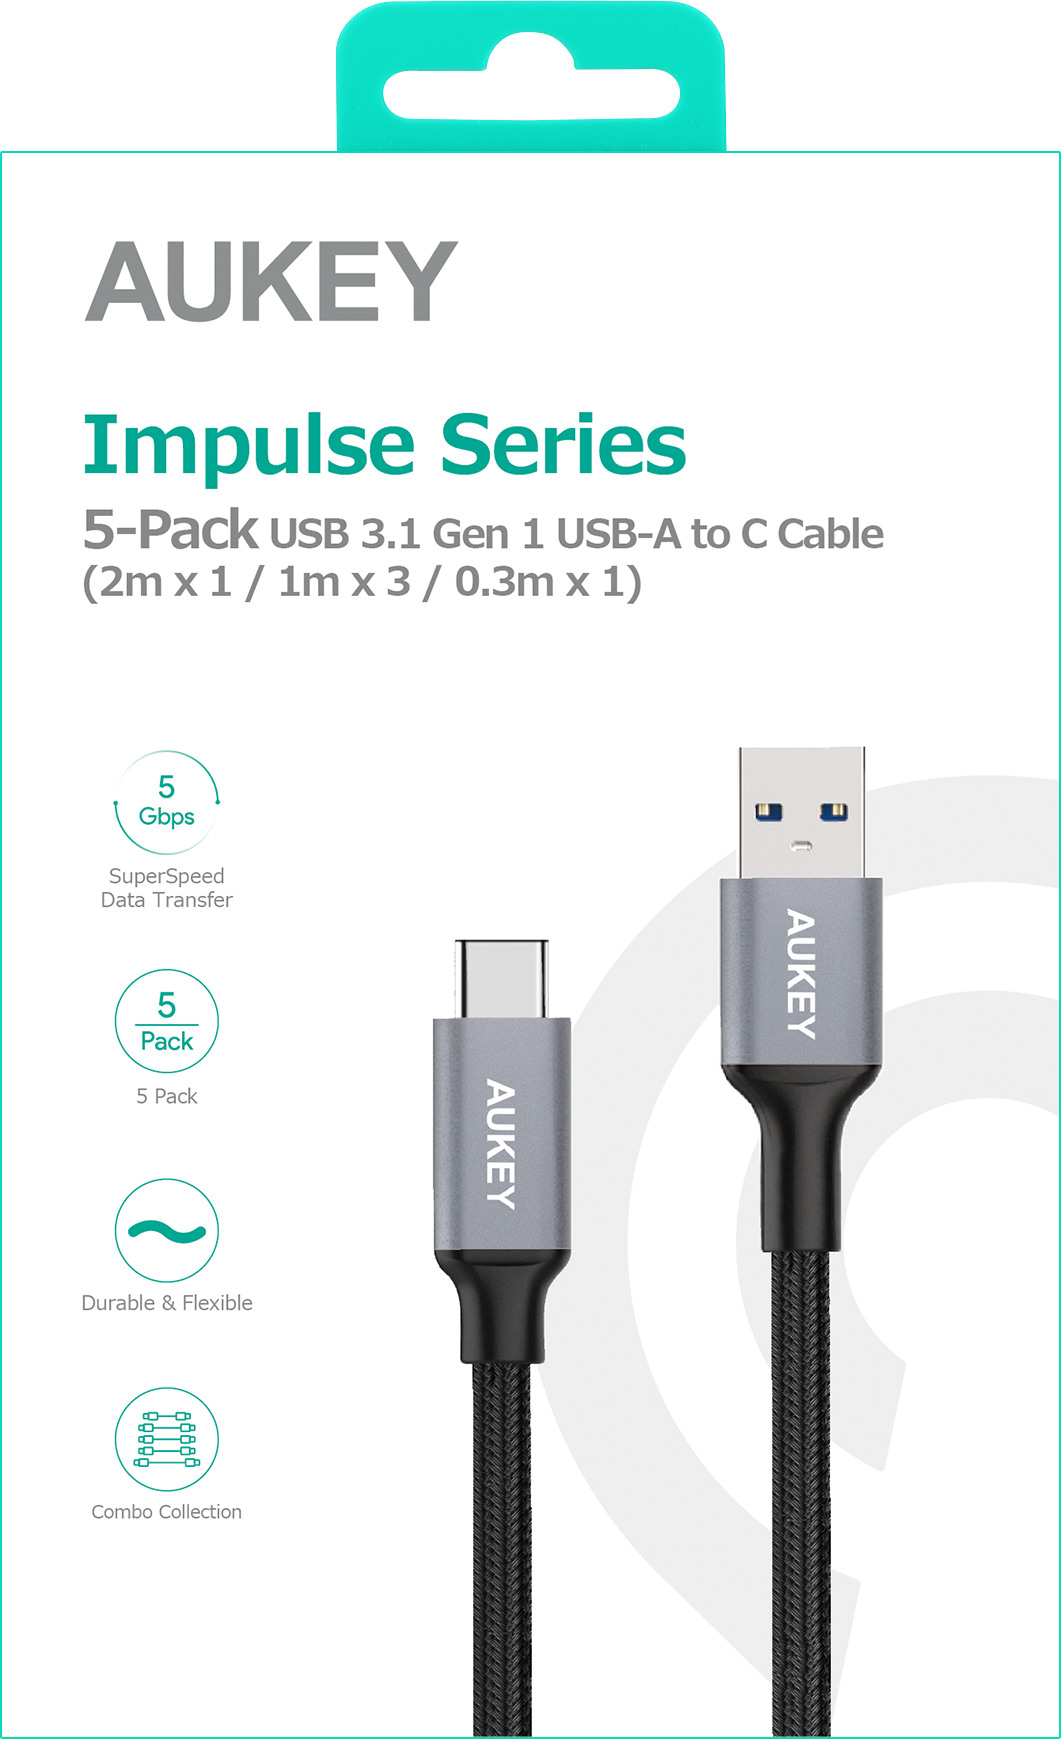 AUKEY ImpulseCable USB-A-to-C bl. CB-CMD2 5Pack 1x2M,3x1M,1x0.3M alu